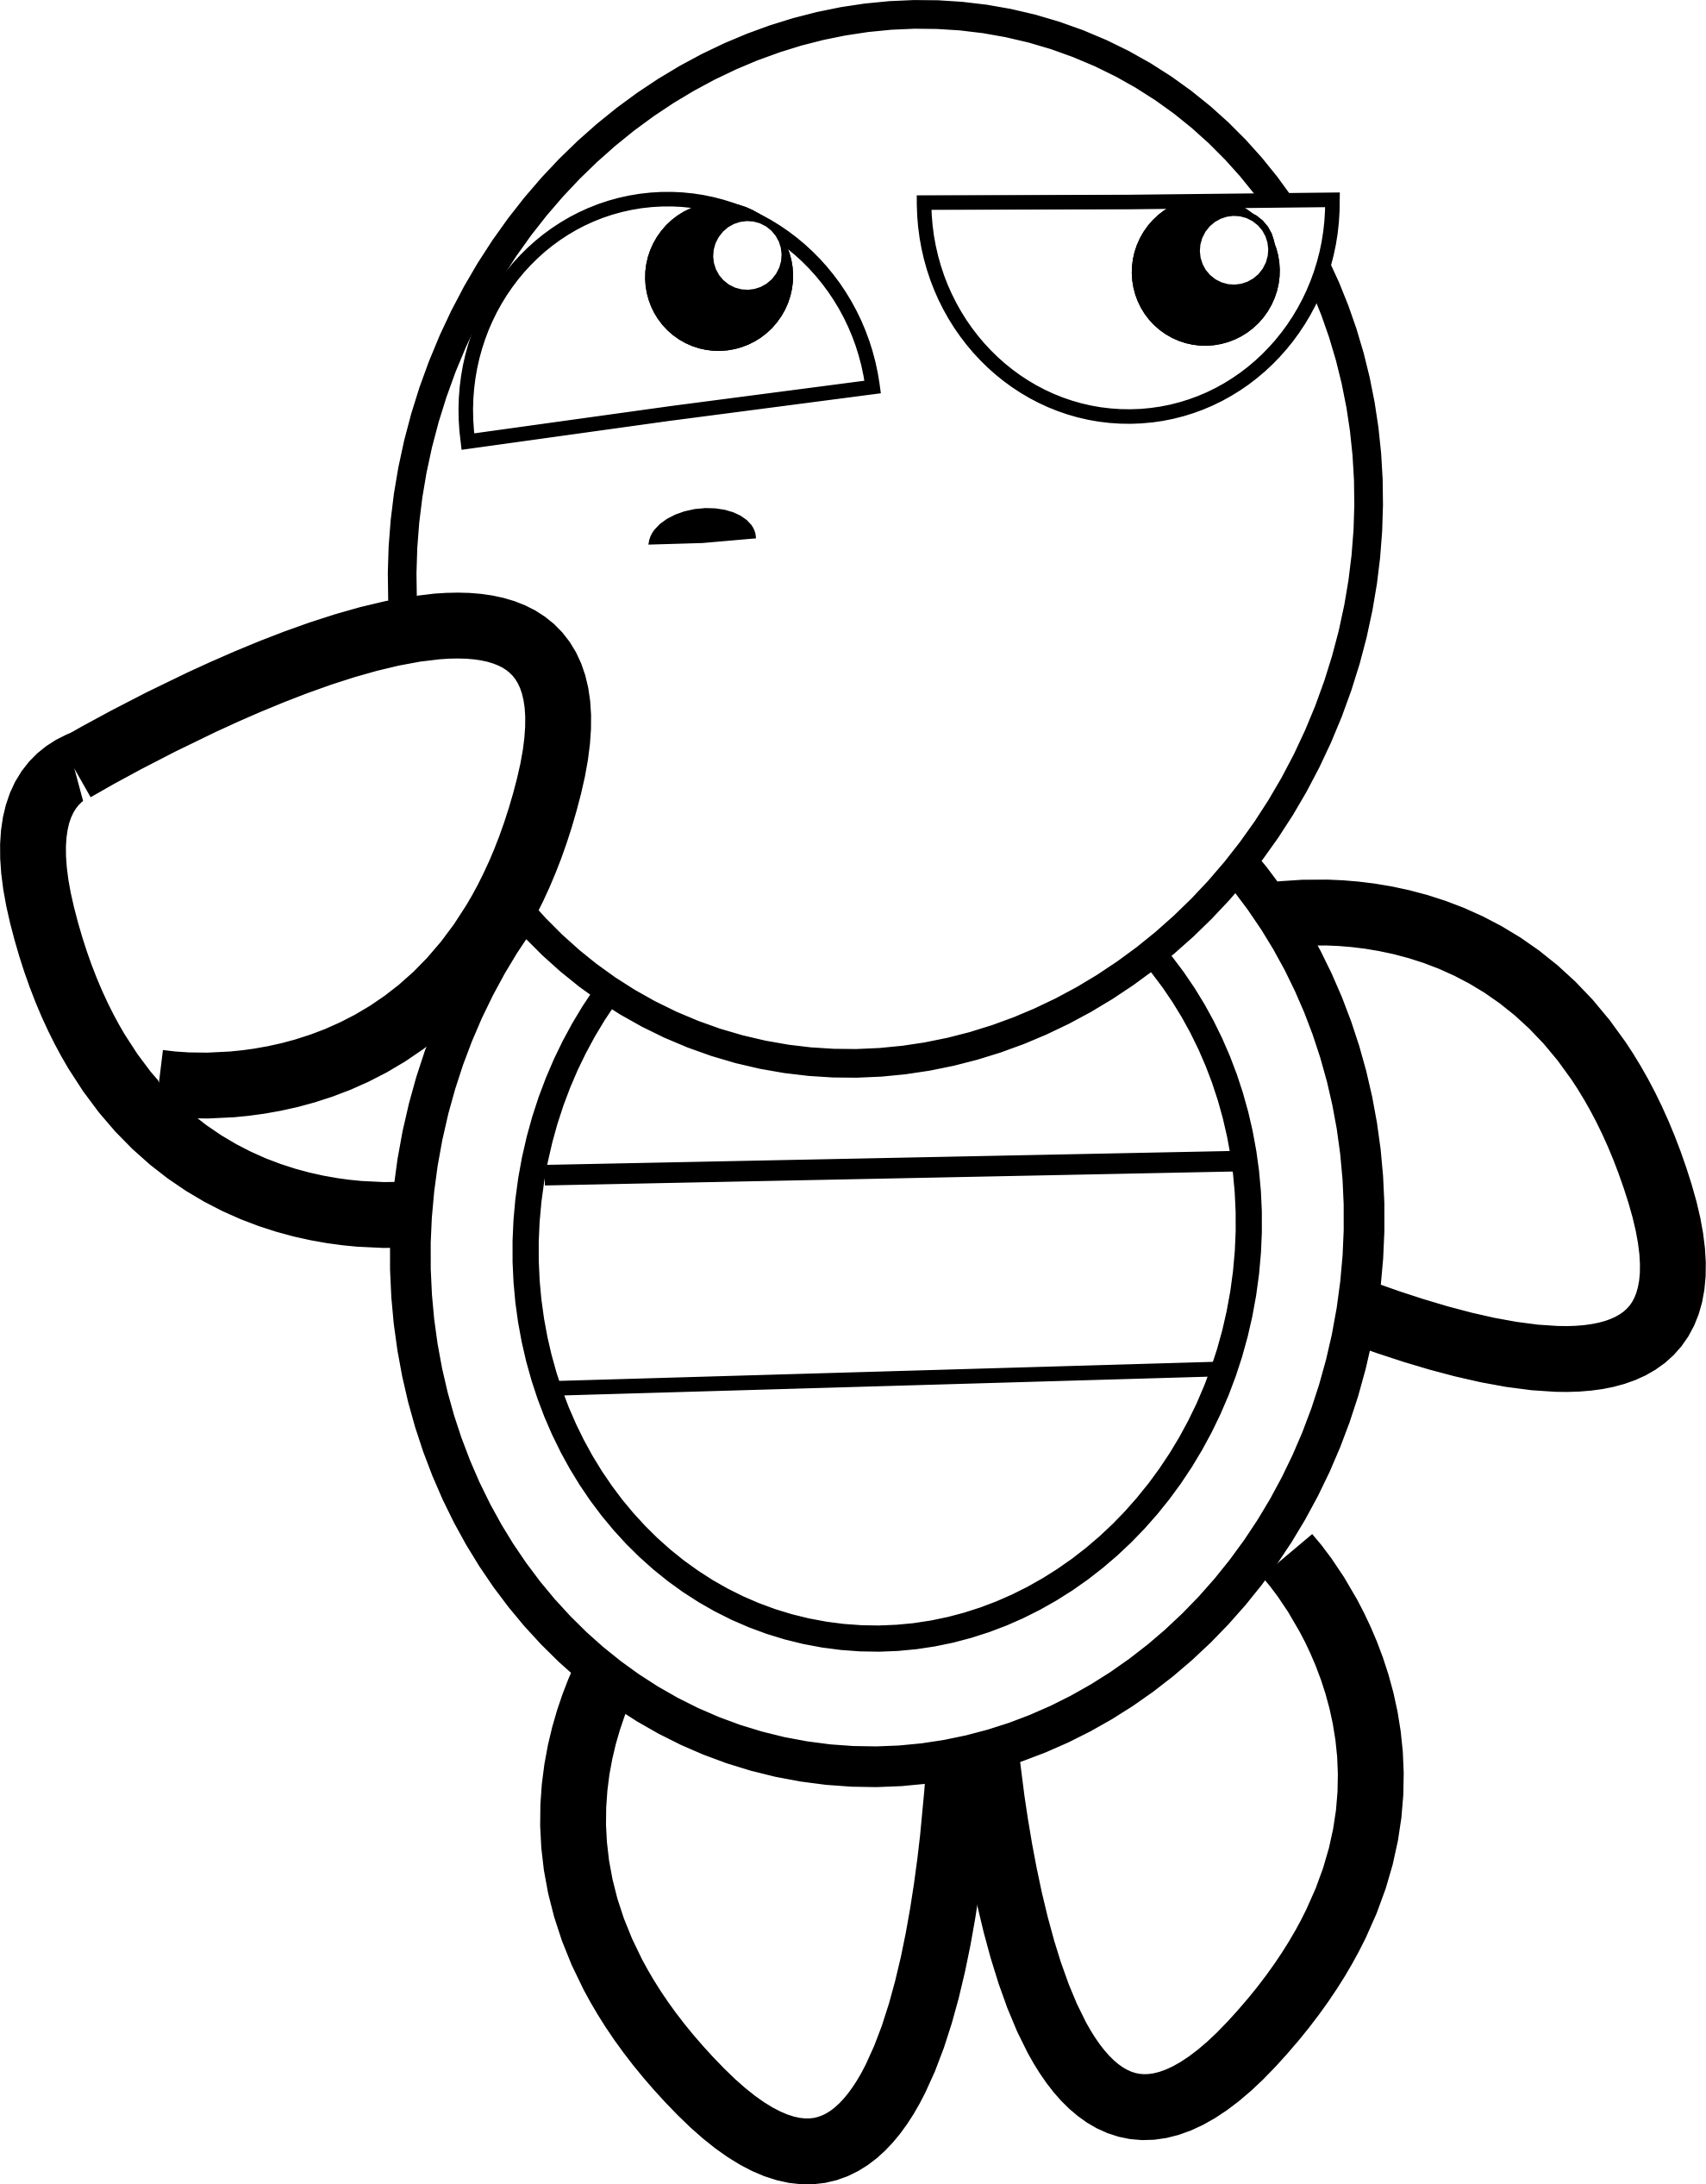 Turtle Black And White Drawing   Clipart Best